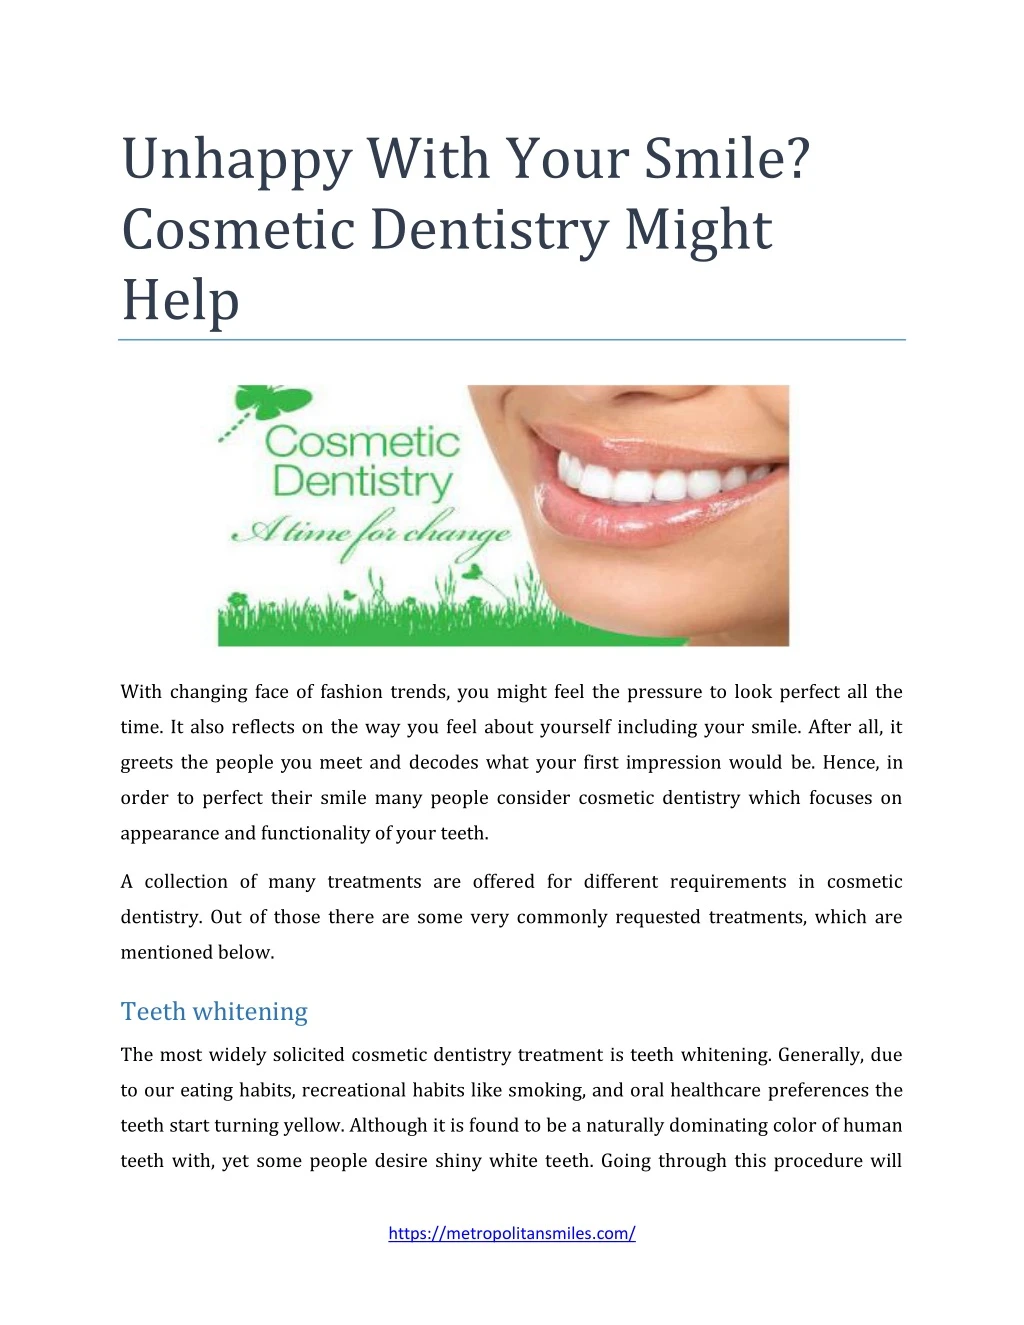 unhappy with your smile cosmetic dentistry might